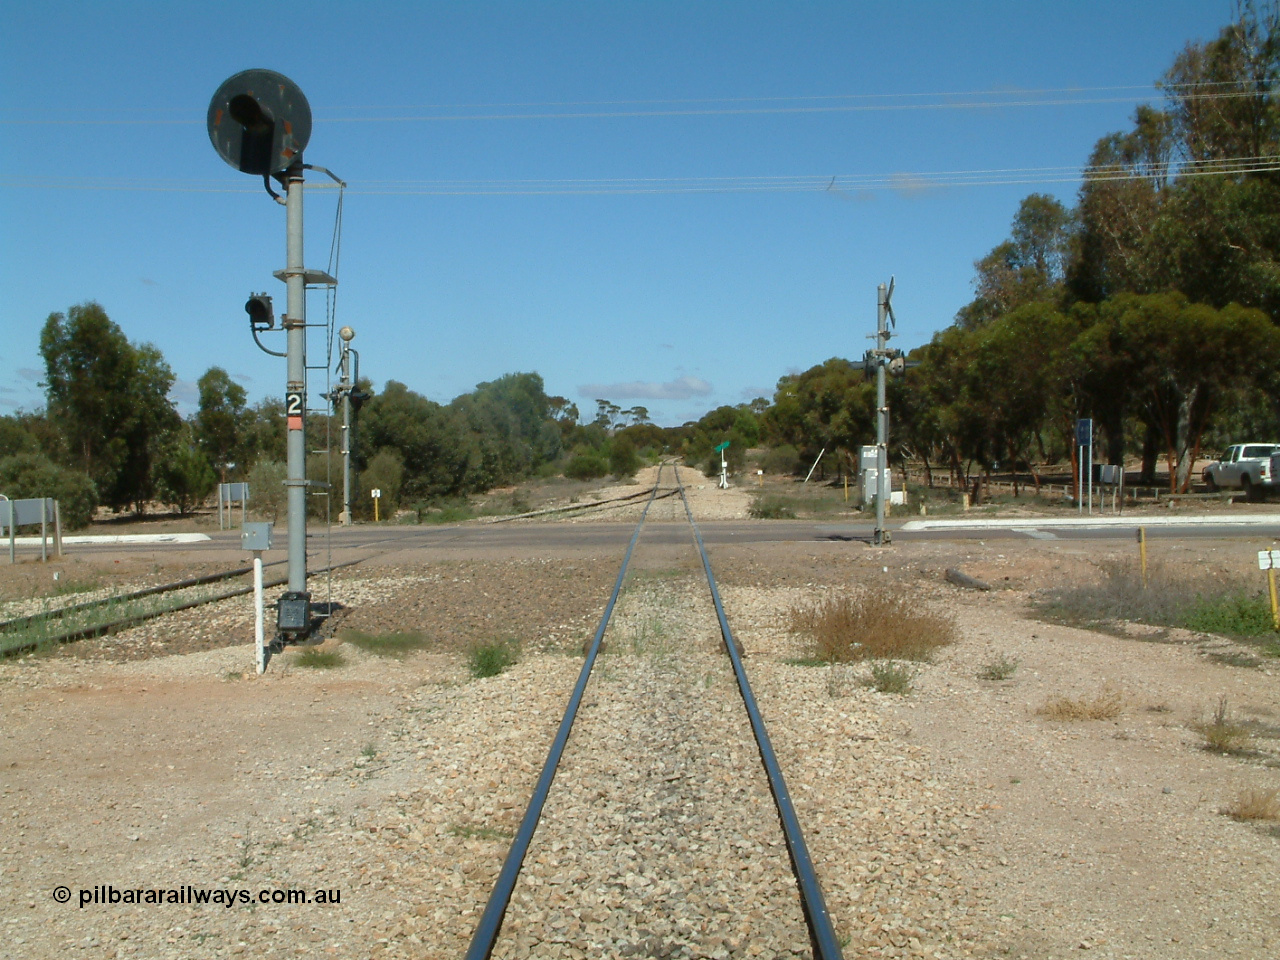 030411 110823
Kimba, looking south across the Eyre Highway grade crossing, the mainline has a coloured light signal, one of only three such signals on the Eyre Peninsula system, the others being at Kyancutta and Port Lincoln.
